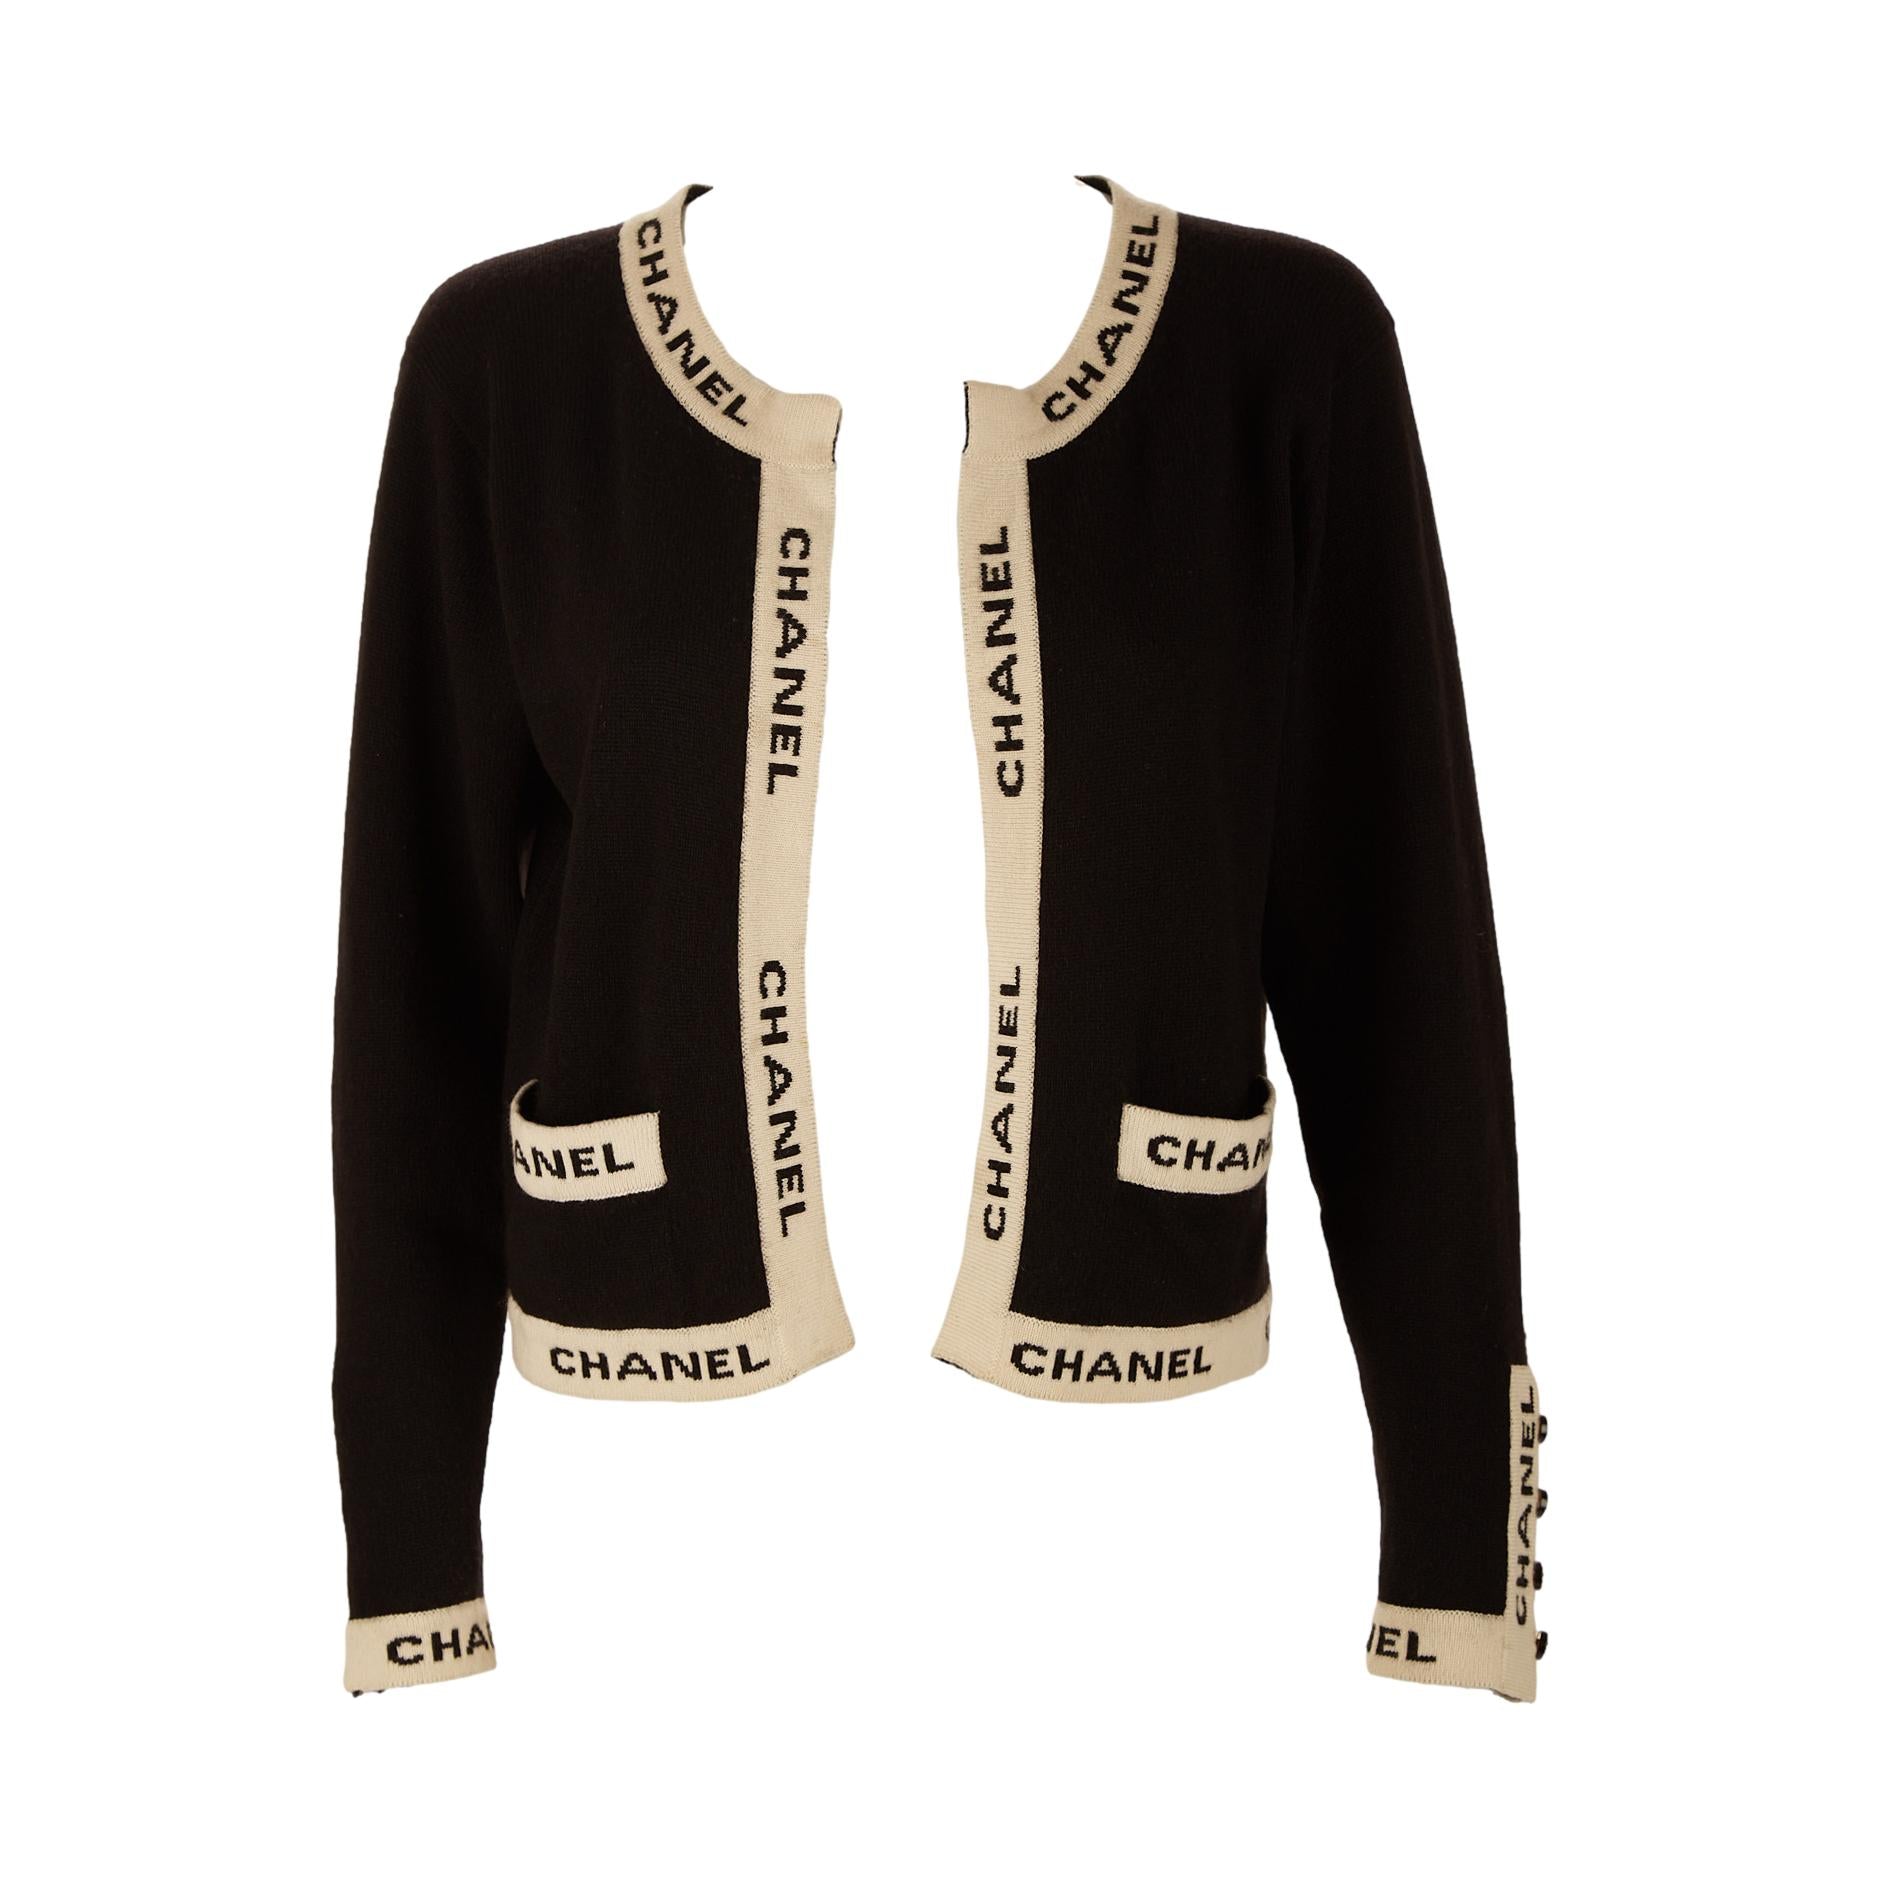 Chanel 2020/ 21 Cashmere Sweater CC Logo Black and White FR 38/ 6